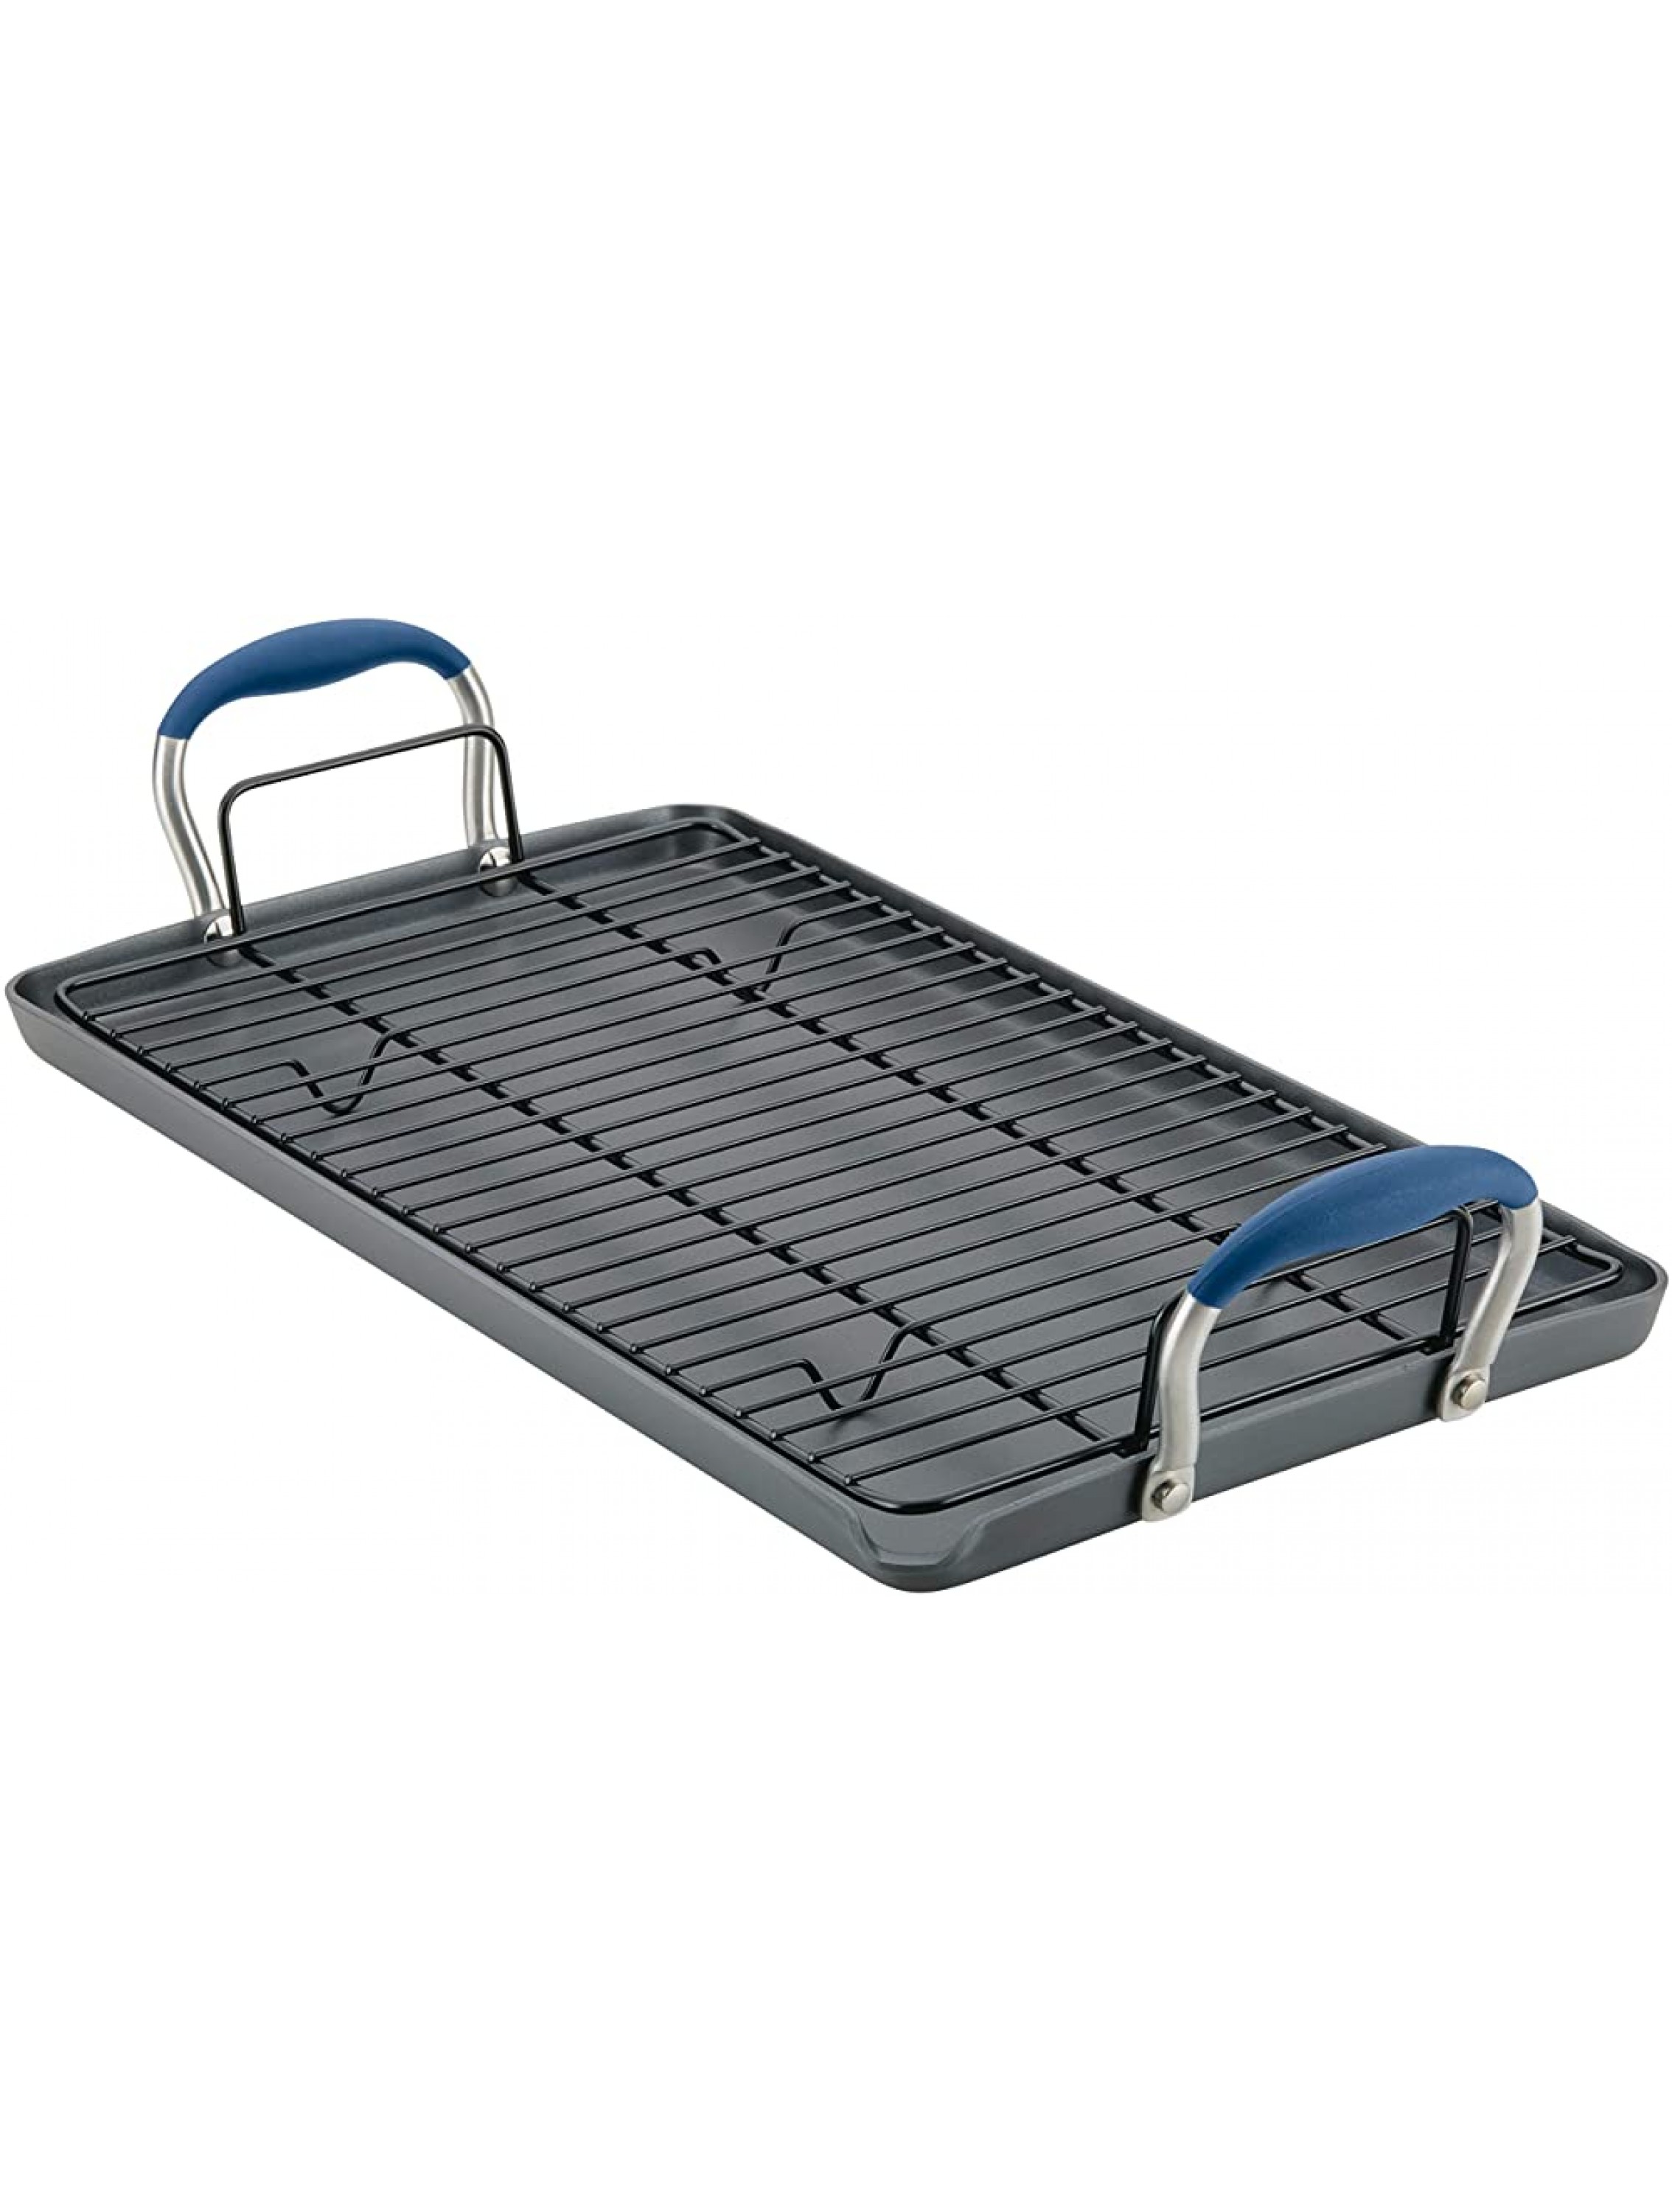 Anolon Advanced Home Hard Anodized Nonstick Double Burner Flat Grill Griddle Rack 10 Inch x 18 Inch Indigo Blue - BHMN5ISQ7